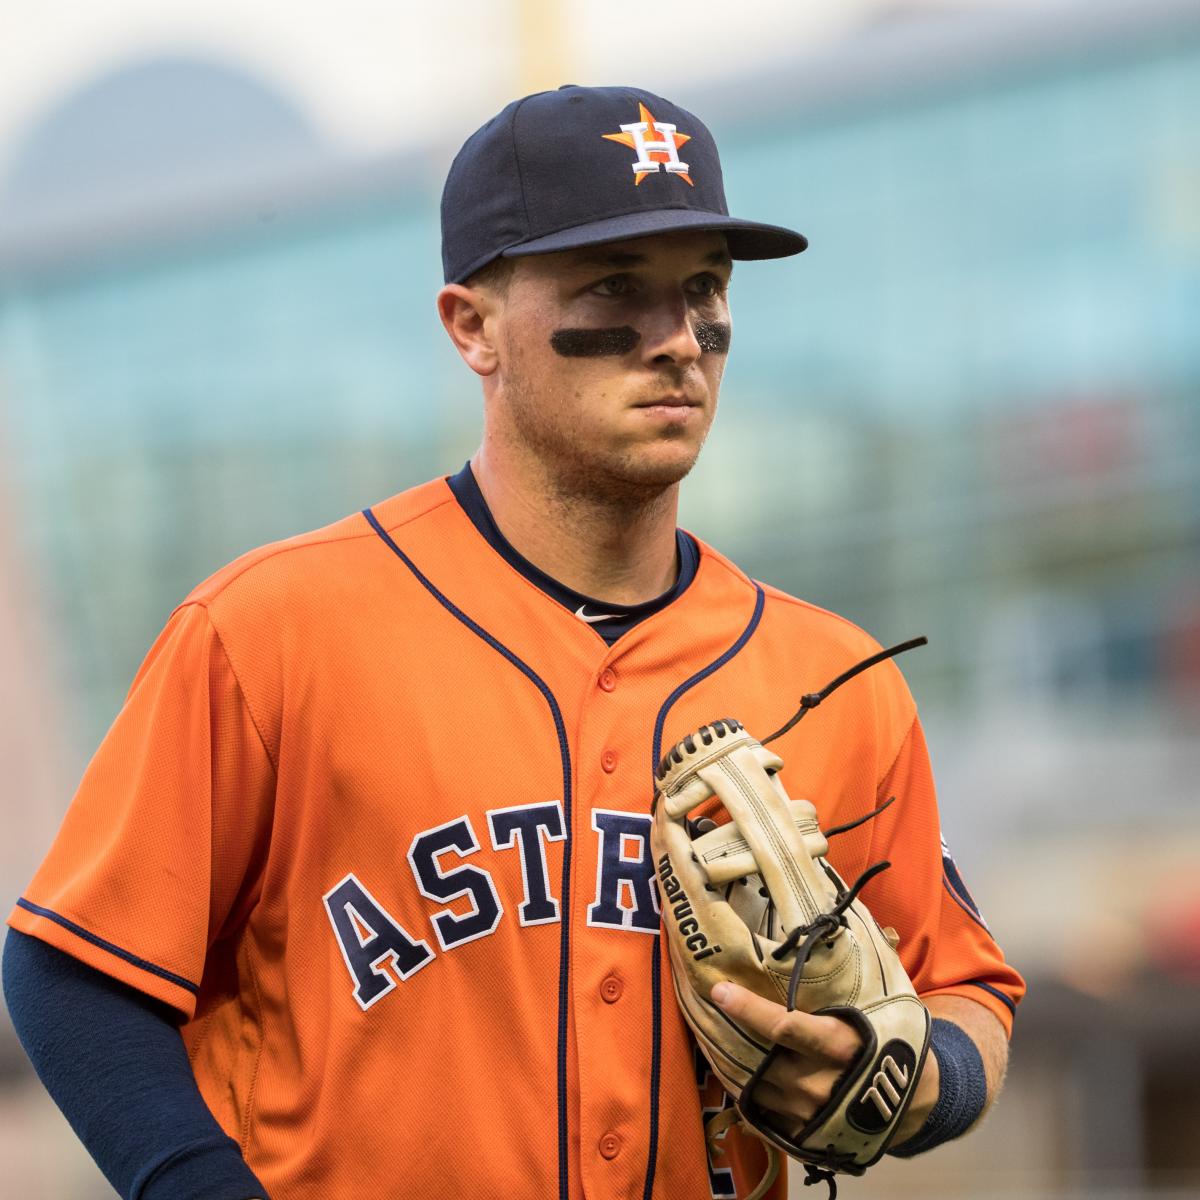 Astros rookie Alex Bregman drawing rave reviews from teammates